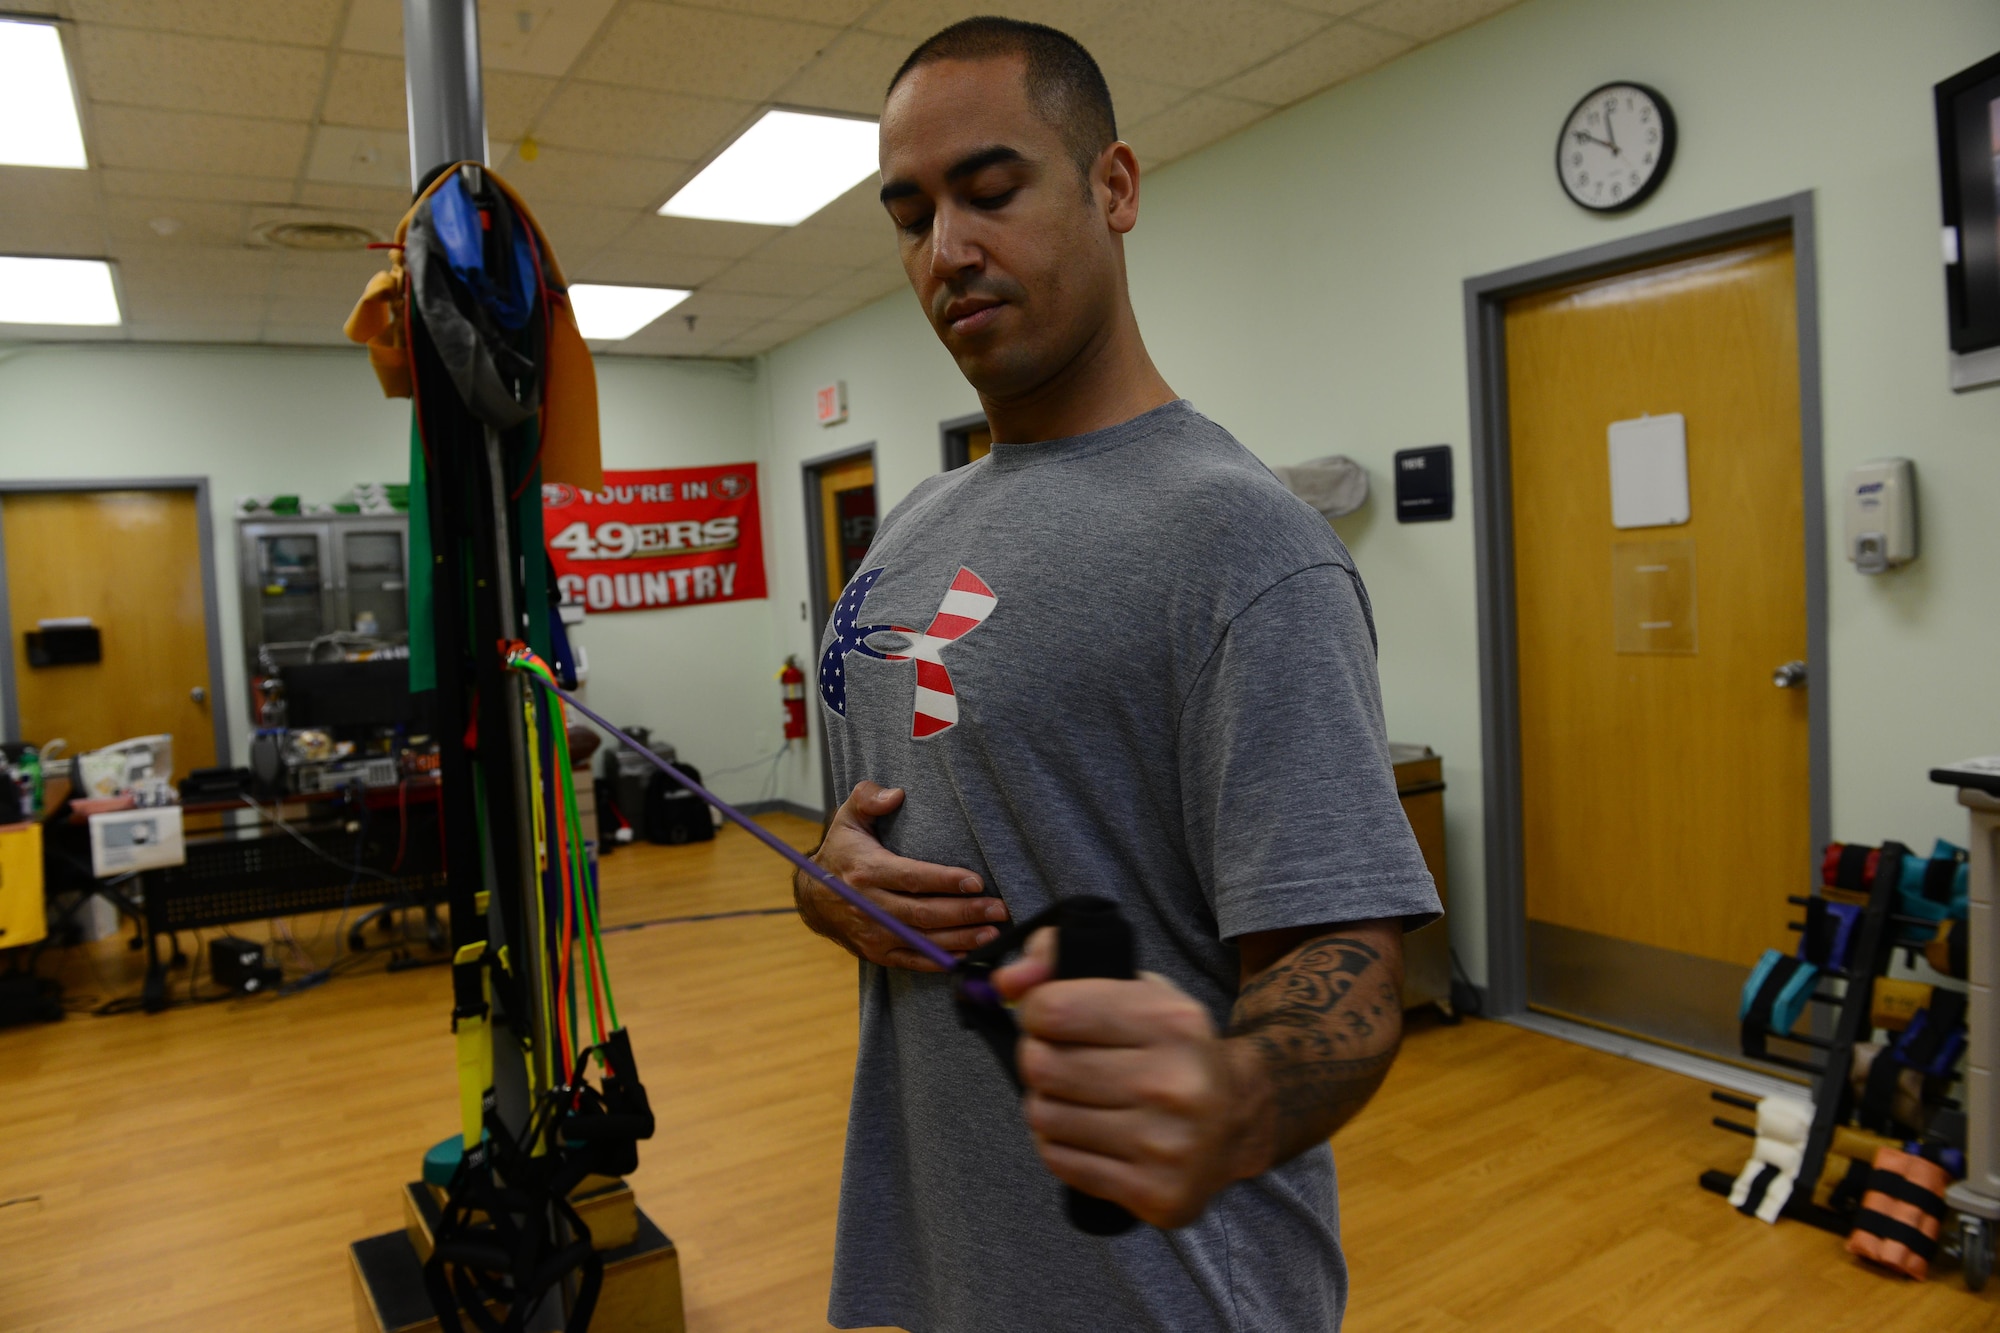 U.S. Air Force Tech. Sgt. Anthony Flores, 8th Medical Operations Squadron physical therapy technician, demonstrates arm exercises during a therapy session at Kunsan Air Base, Republic of Korea, Jan. 7, 2016. A physical therapy technician's job is to assist the commander and return active duty members to full duty status, making them fit to fight. (U.S. Air Force photo by Senior Airman Ashley L. Gardner/Released)
